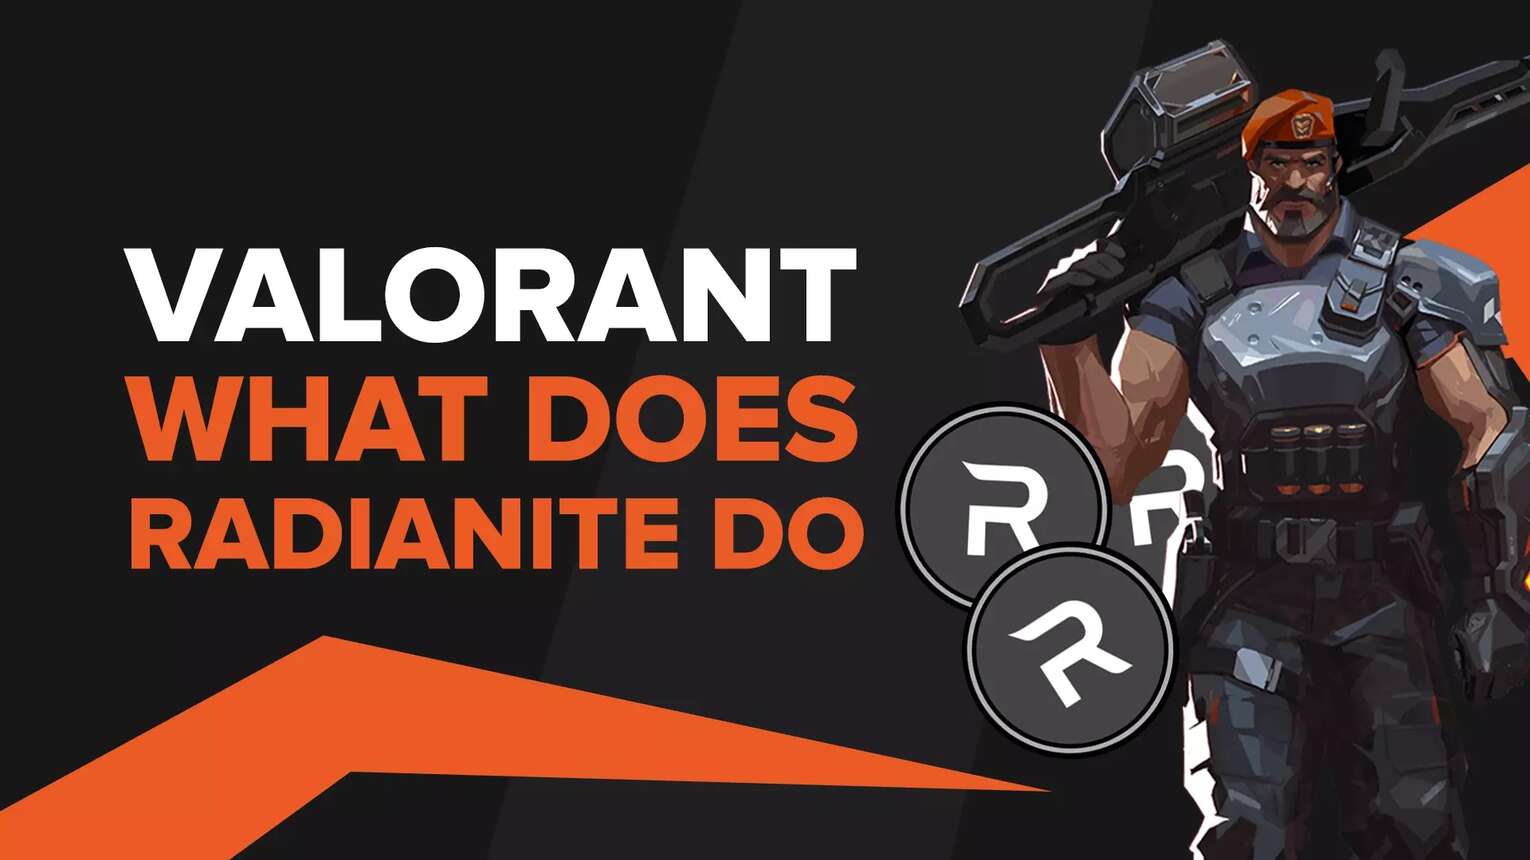 What are the uses of Radianite Points in Valorant?